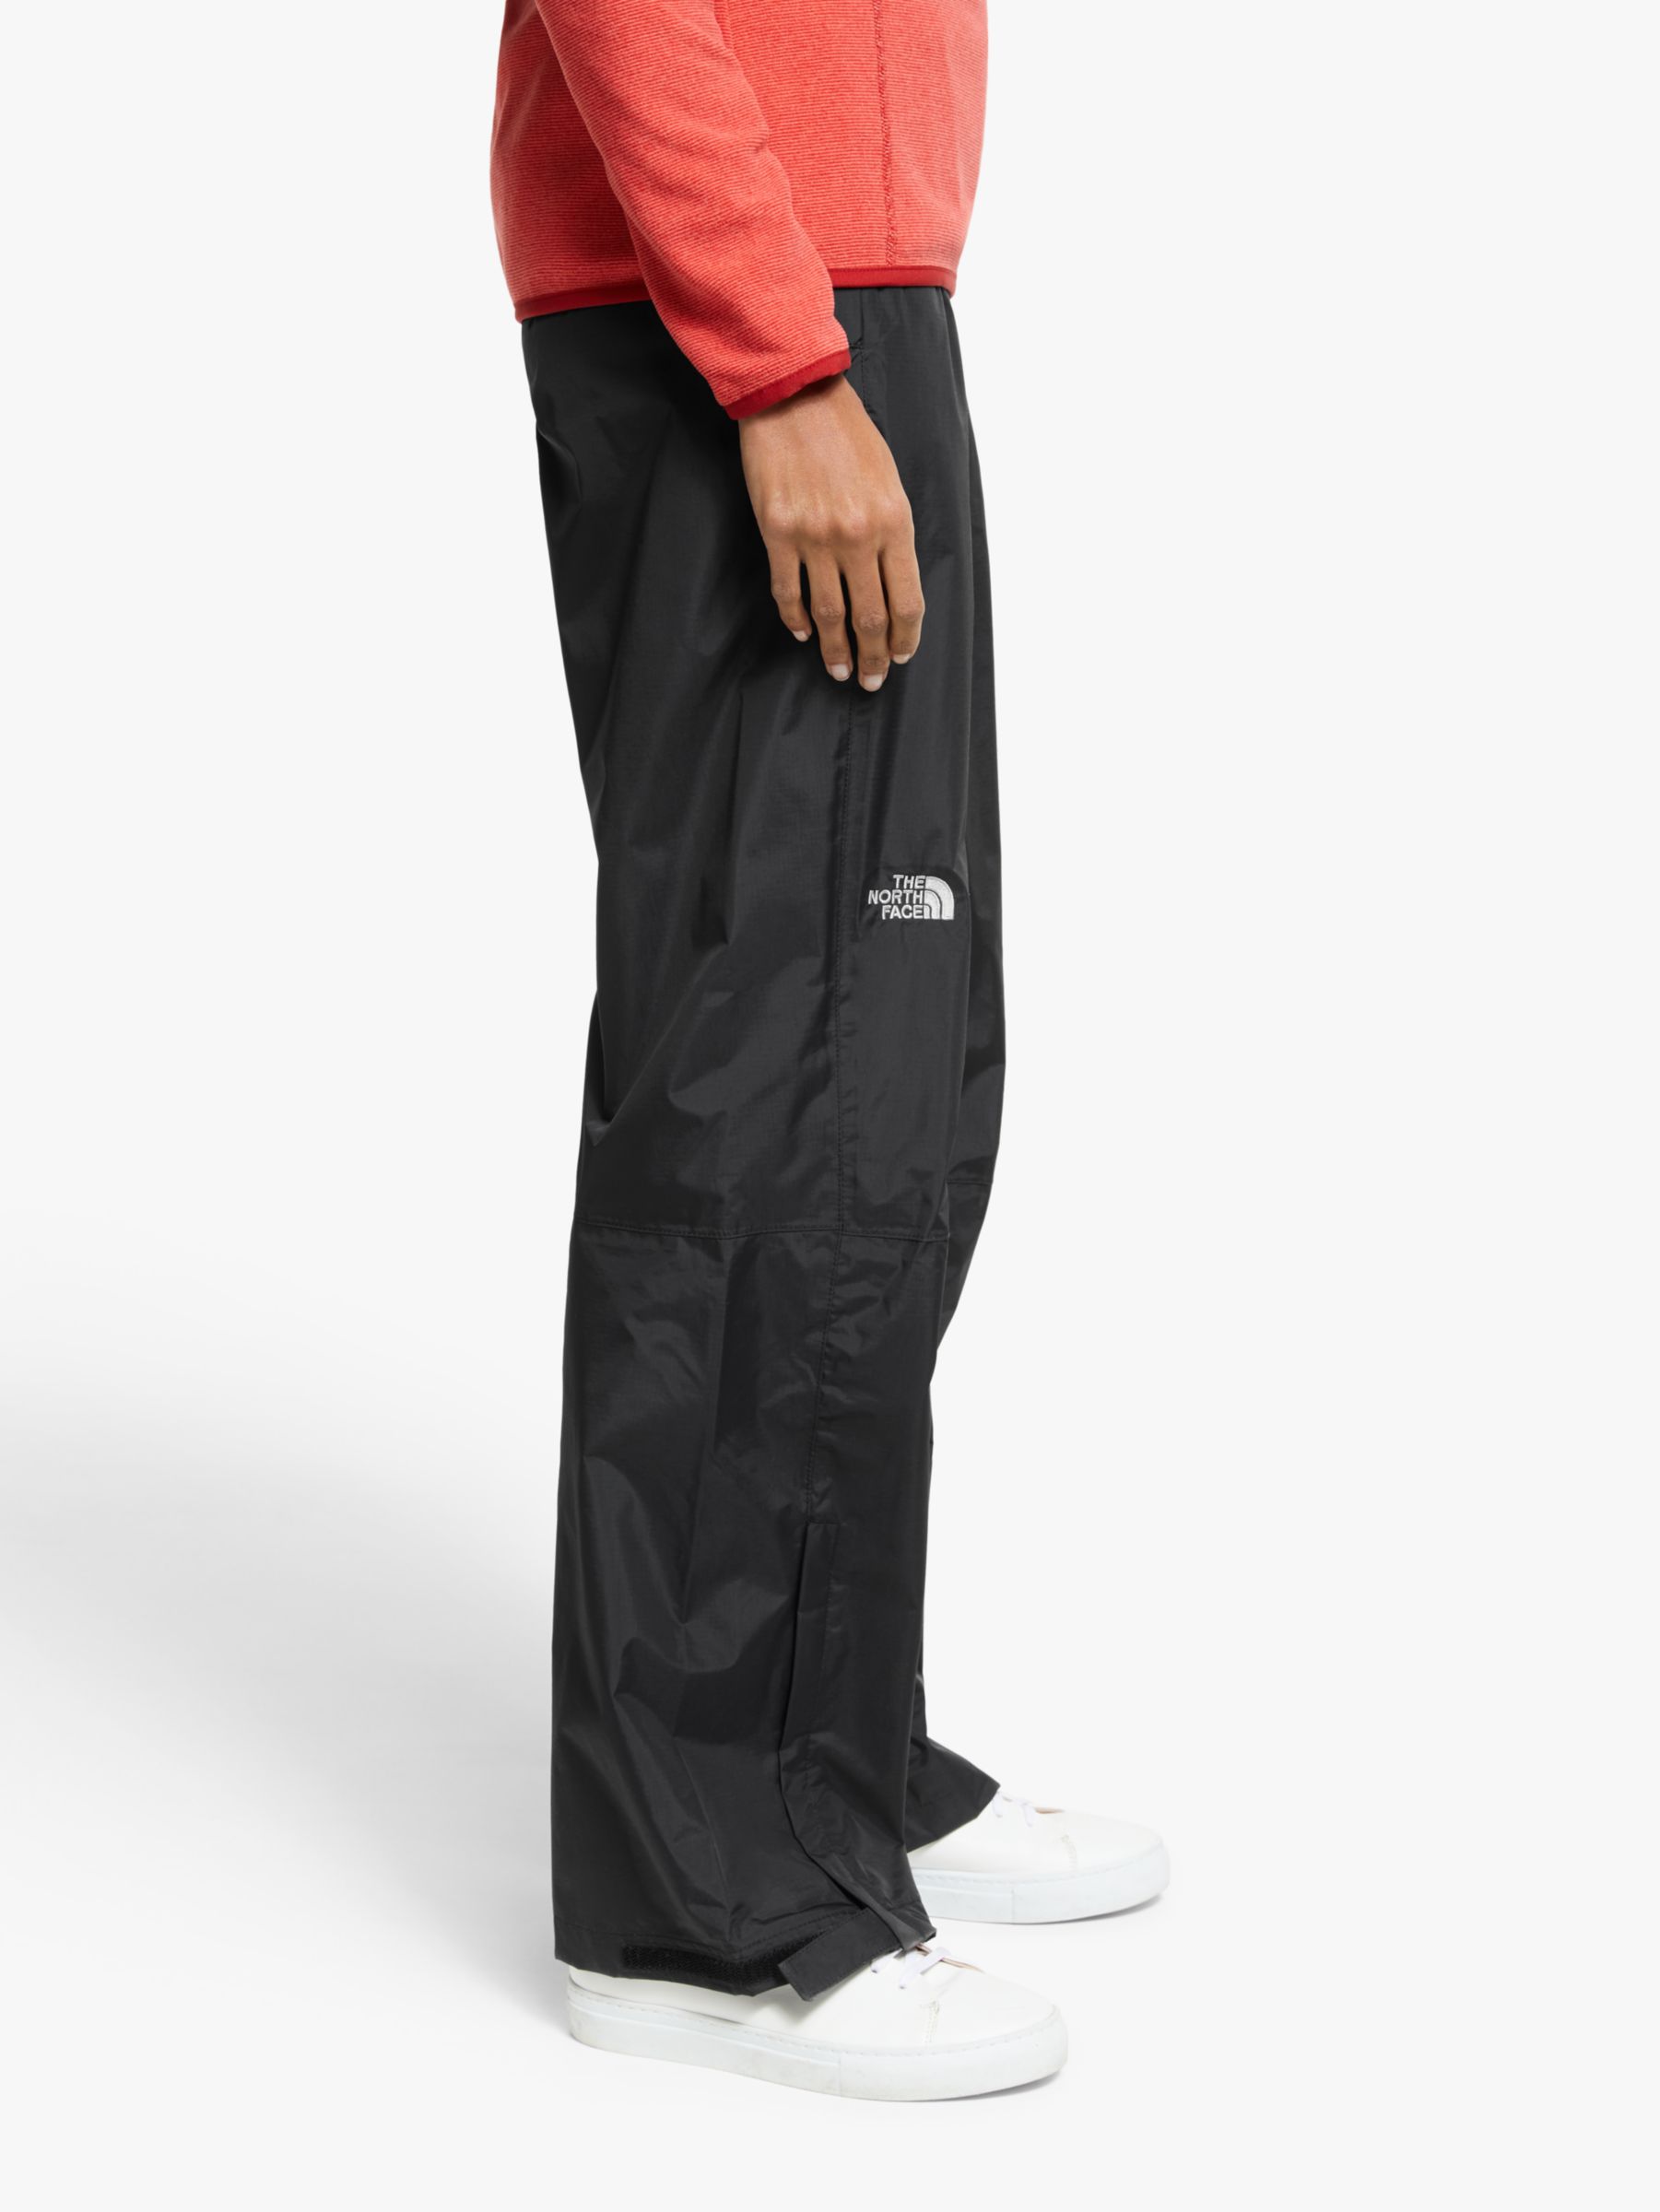 north face mens waterproof trousers